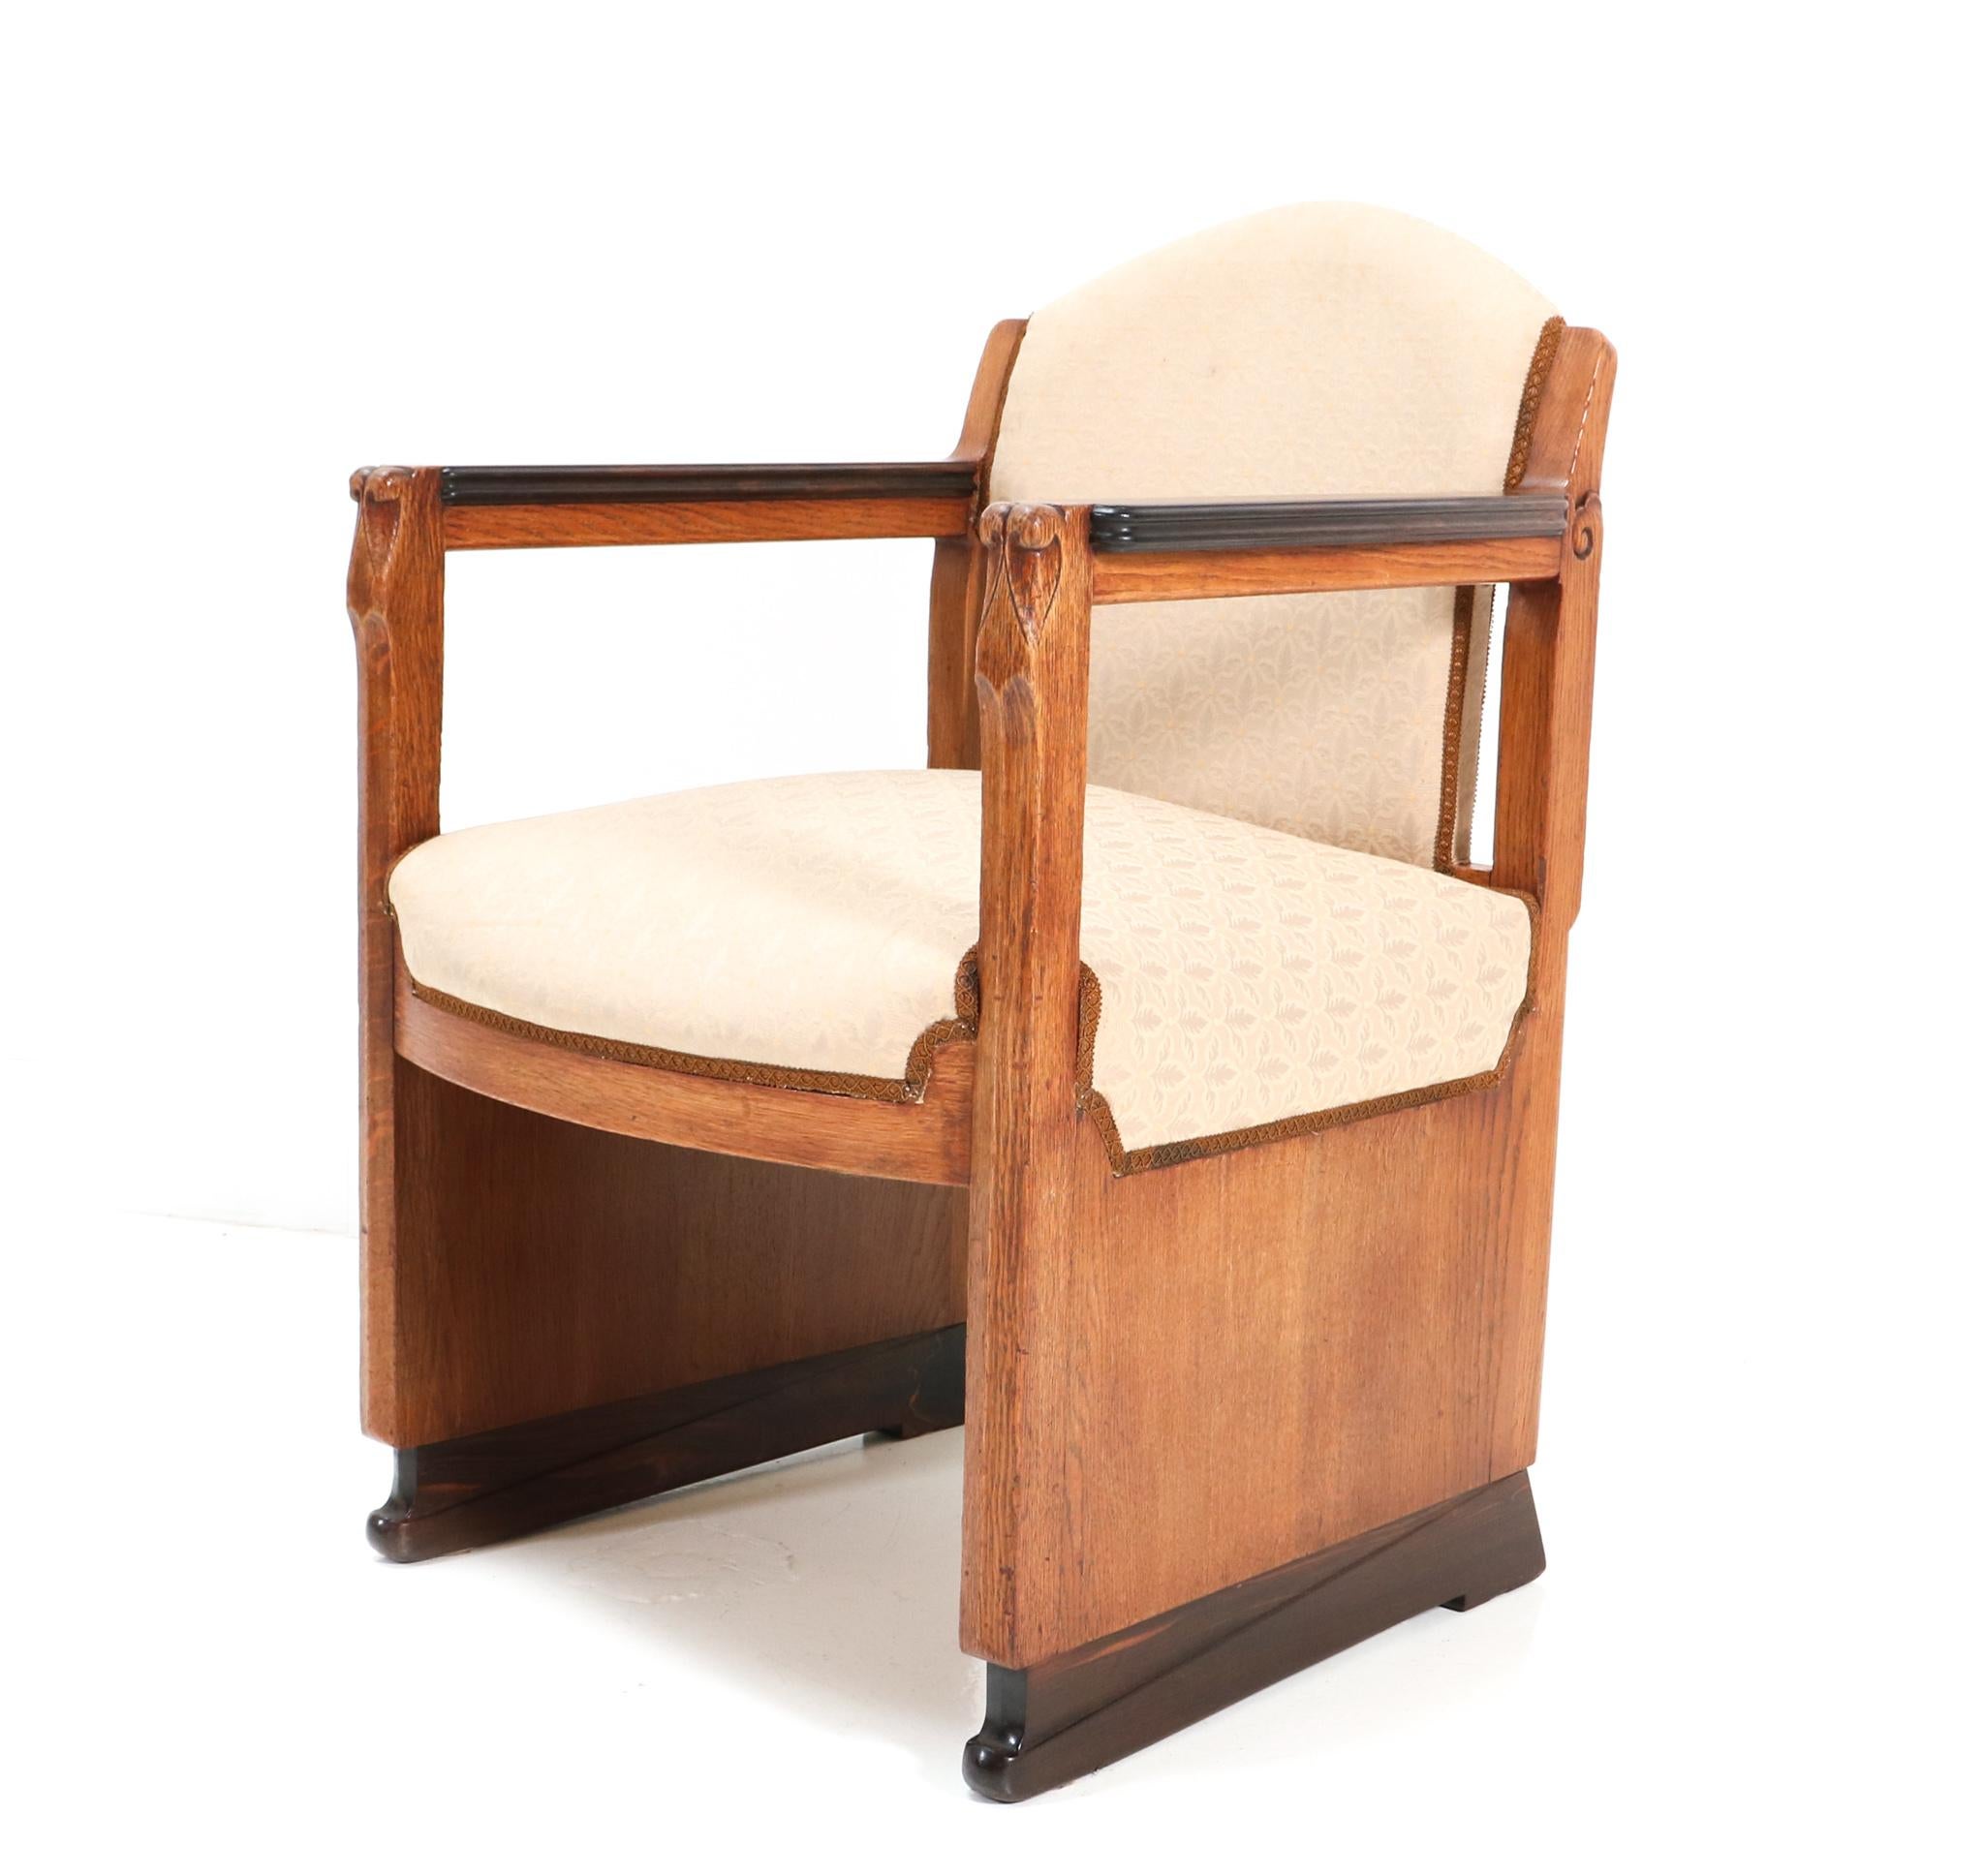 Early 20th Century Two Oak Art Deco Amsterdamse School Armchairs by Hildo Krop for 't Woonhuys For Sale